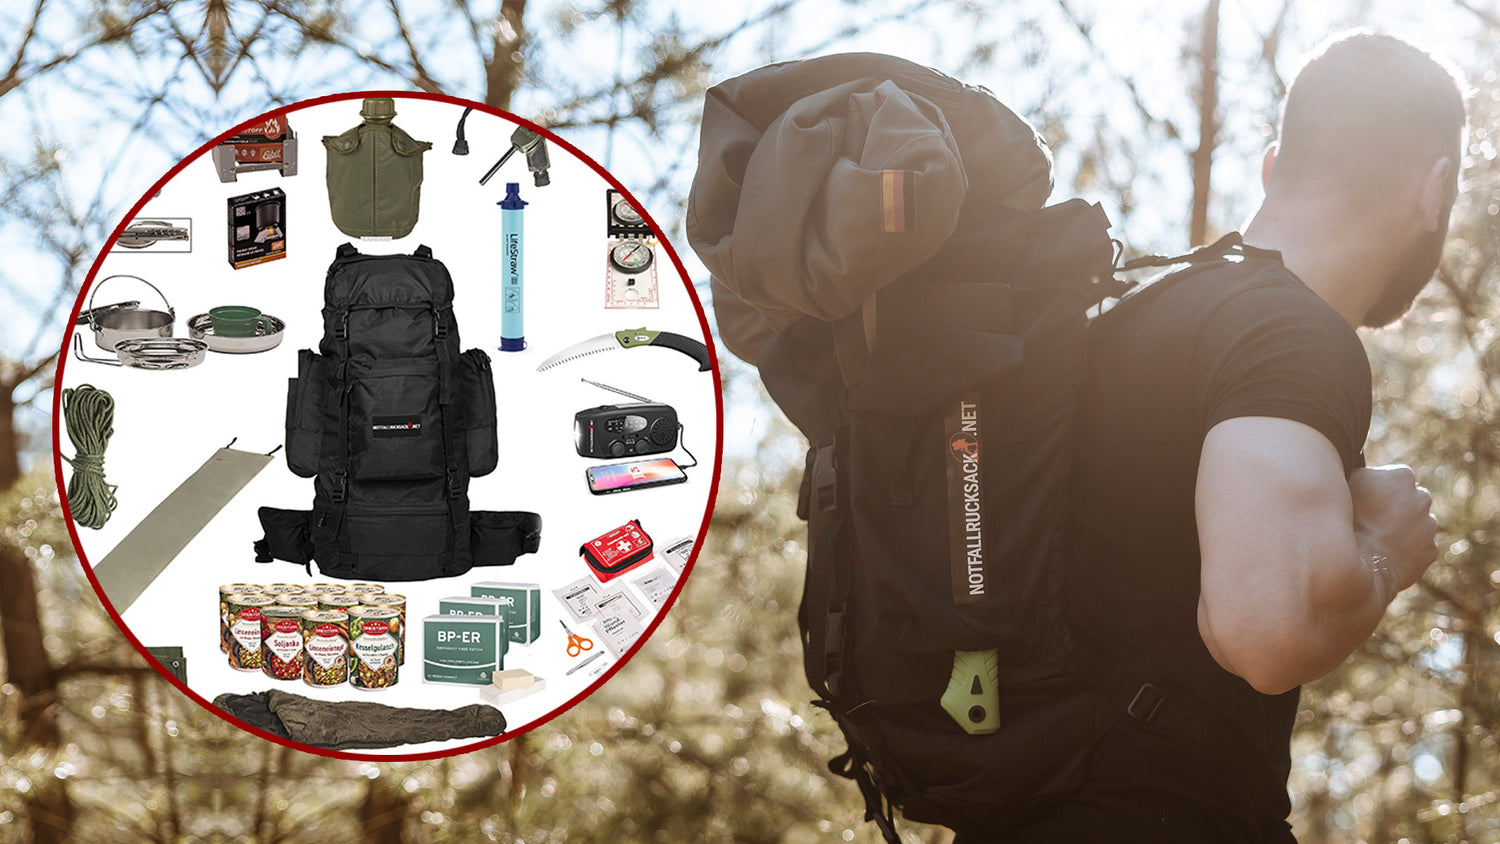 Emergency backpack - outdoor items, crisis preparation and more! –  Notfallrucksack